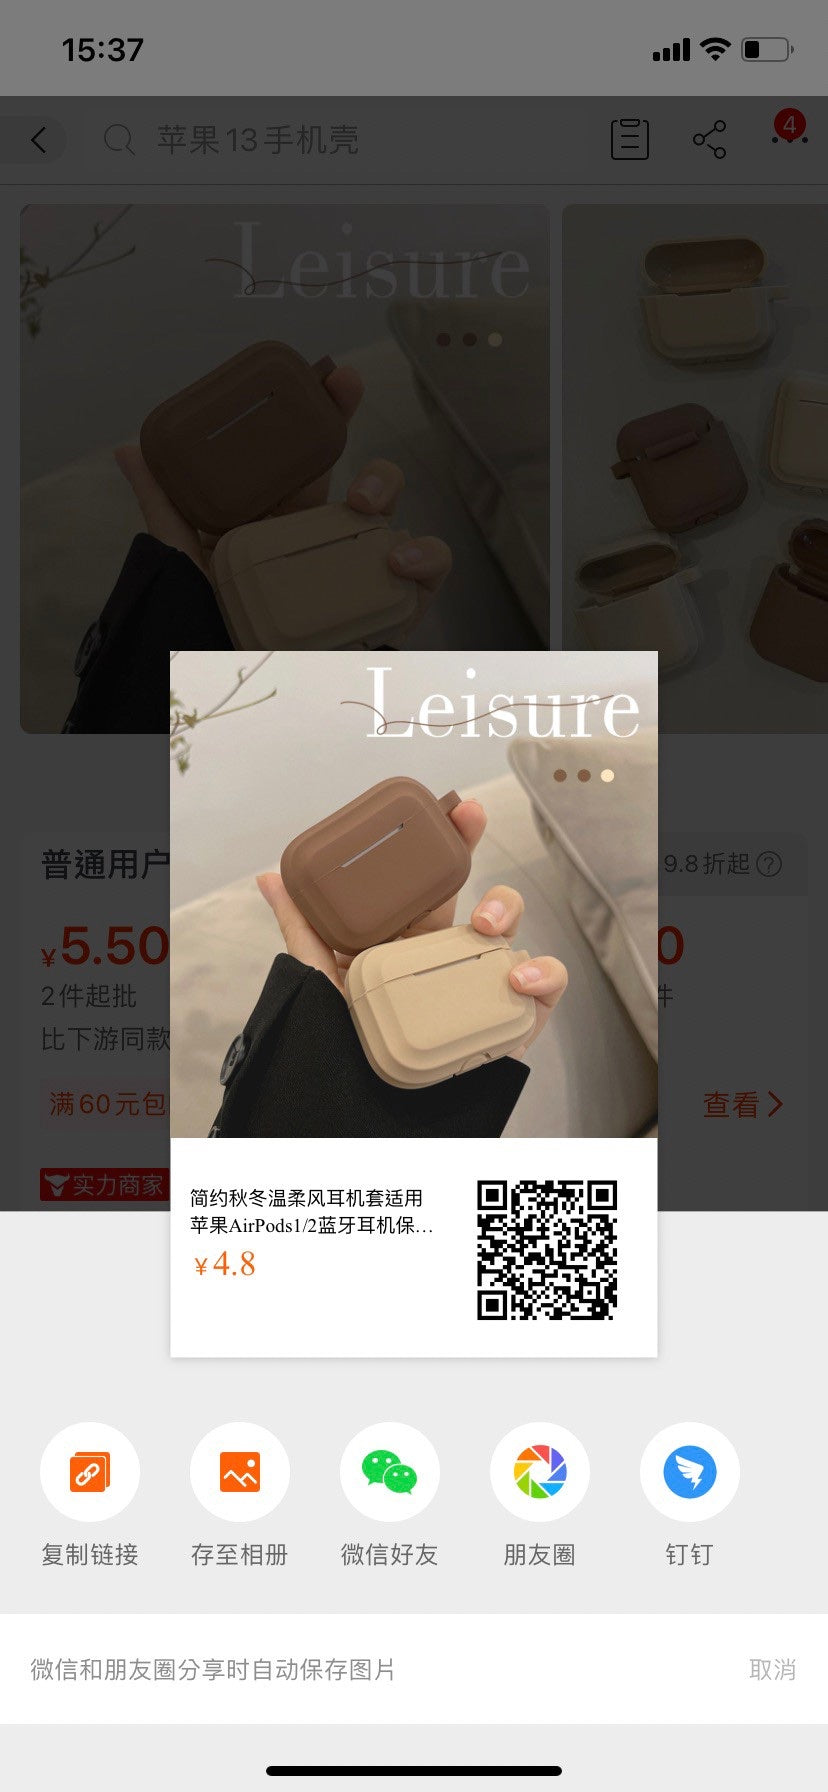 【Airpods Case】 クラシック暖かい色Airpods/ AirPods Proケース